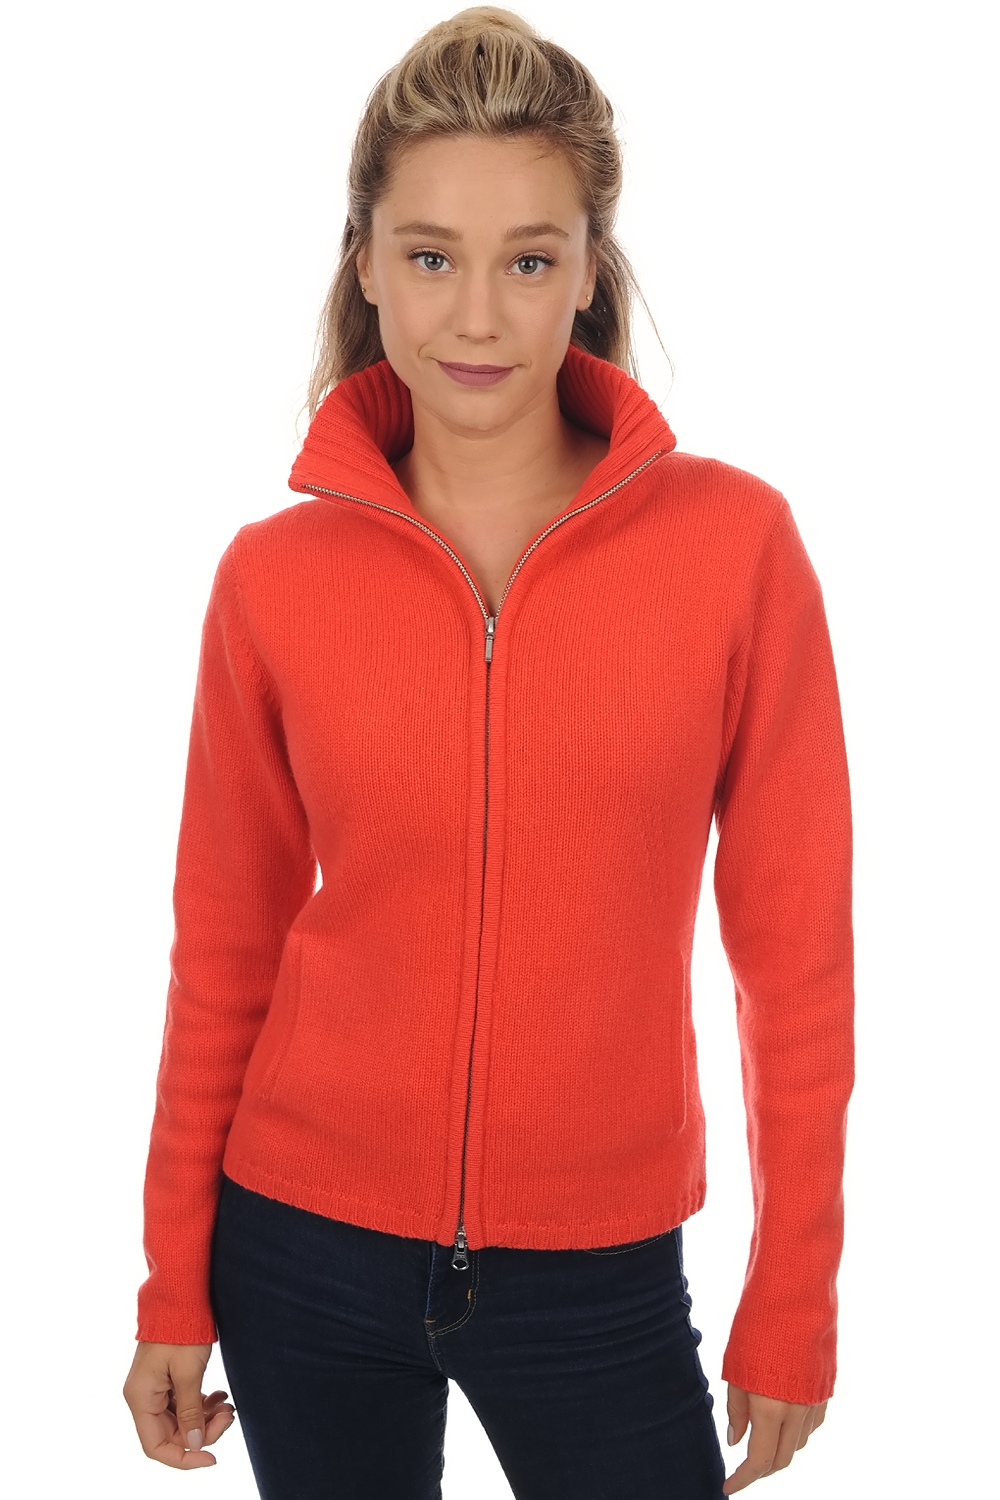 Cachemire pull femme elodie corail lumineux xs